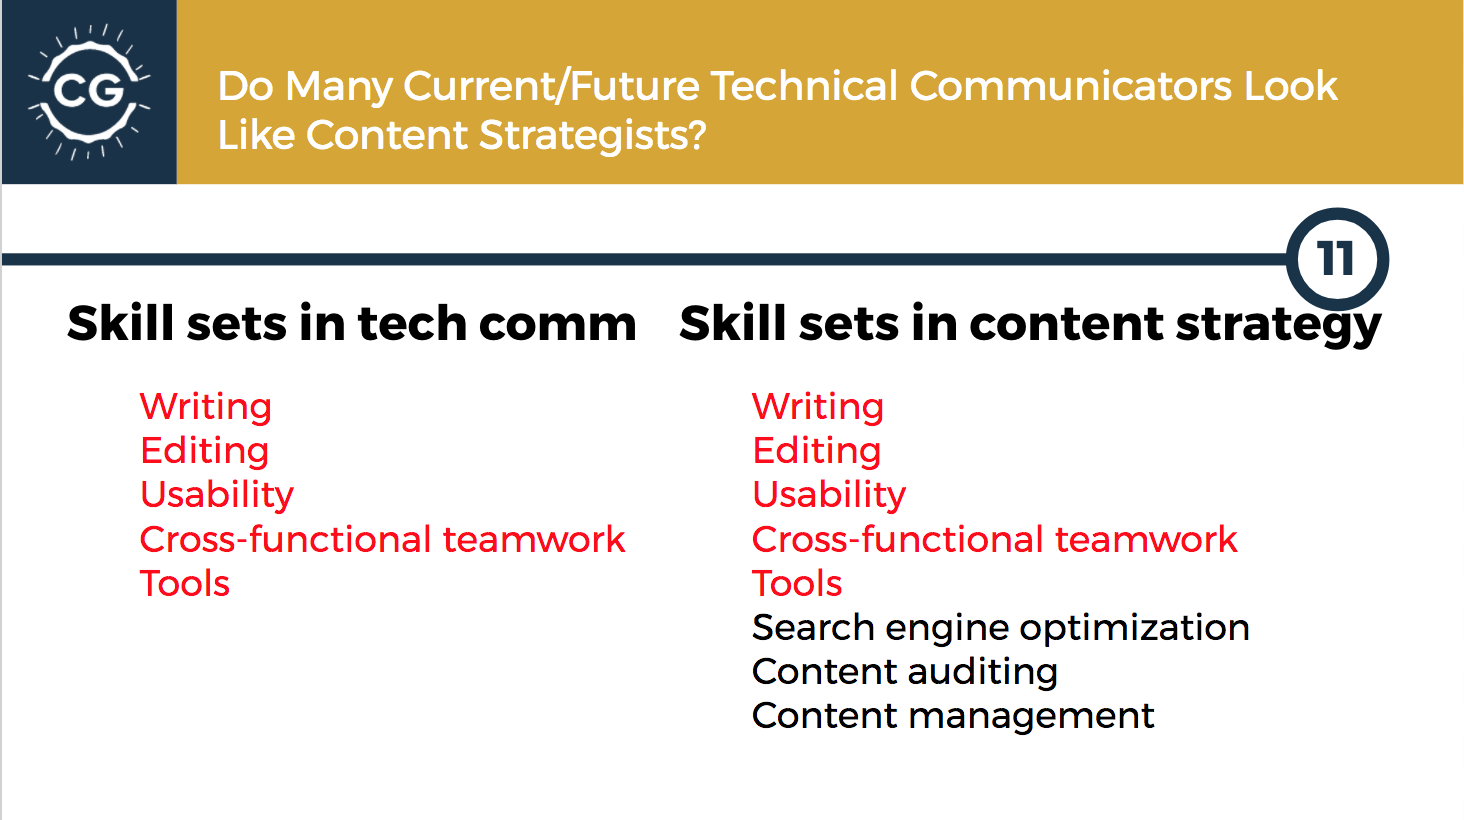 A PowerPoint slide showing the skill sets involved in content strategy and technical communication, published to: "Content Strategy and Technical Communication: What Does the Future Hold?"